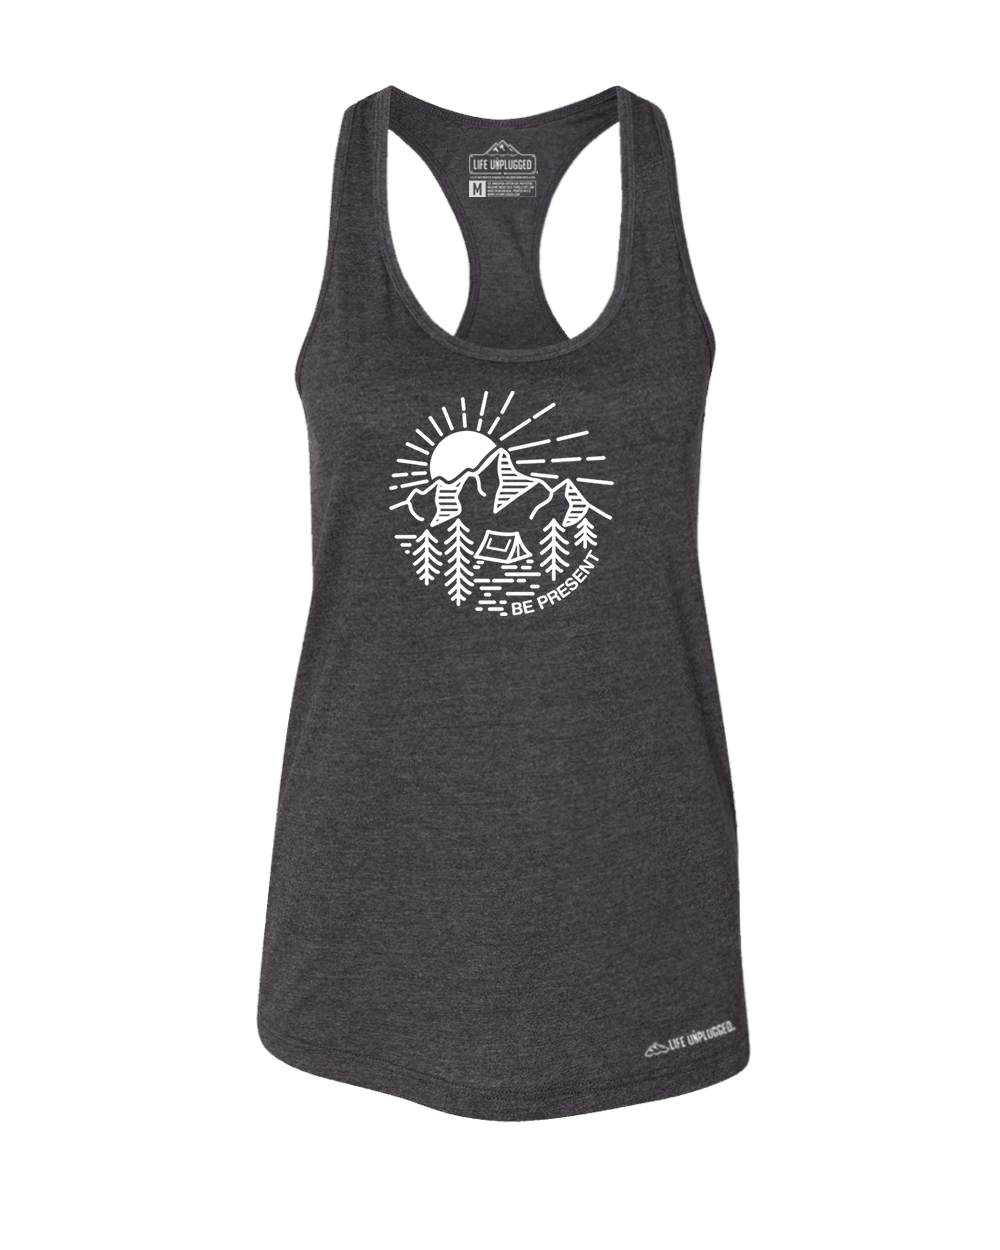 Mountain Sunset Premium Women's Relaxed Fit Racerback Tank Top - Life Unplugged